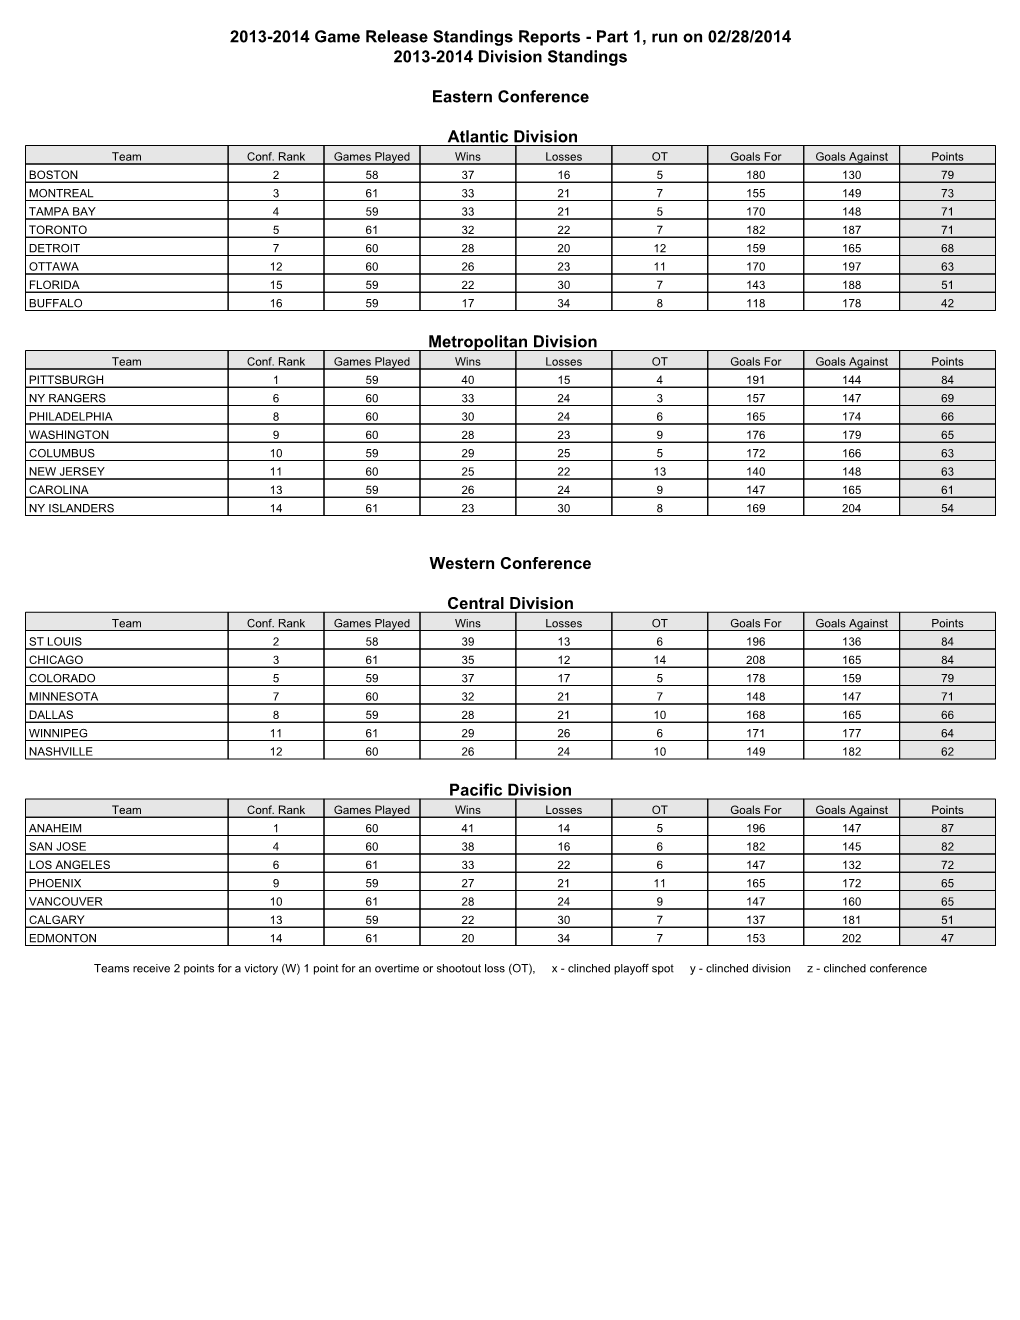 2013-2014 Game Release Standings Reports - Part 1, Run on 02/28/2014 2013-2014 Division Standings